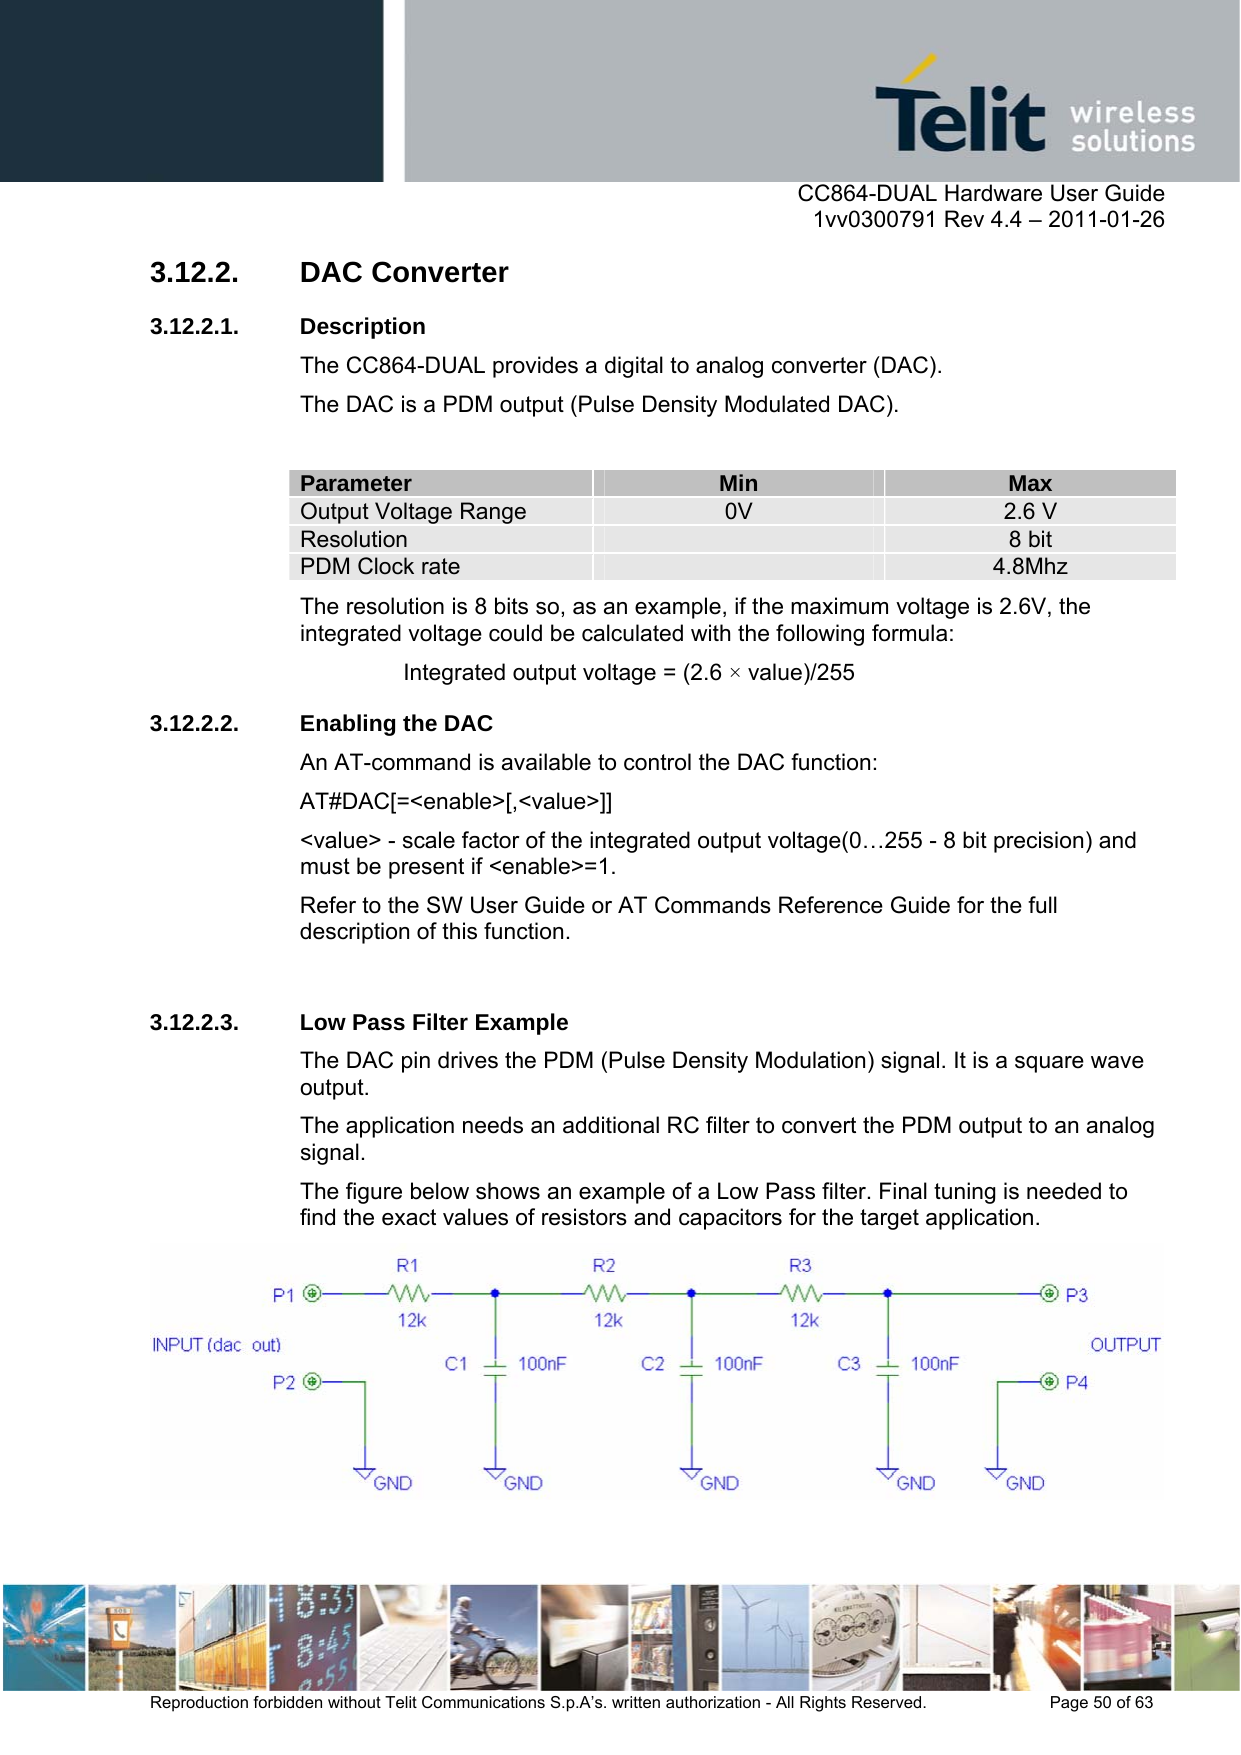      CC864-DUAL Hardware User Guide    1vv0300791 Rev 4.4 – 2011-01-26  Reproduction forbidden without Telit Communications S.p.A’s. written authorization - All Rights Reserved.    Page 50 of 63  3.12.2. DAC Converter 3.12.2.1. Description The CC864-DUAL provides a digital to analog converter (DAC). The DAC is a PDM output (Pulse Density Modulated DAC).  Parameter  Min  Max Output Voltage Range  0V  2.6 V Resolution   8 bit PDM Clock rate   4.8Mhz The resolution is 8 bits so, as an example, if the maximum voltage is 2.6V, the integrated voltage could be calculated with the following formula: Integrated output voltage = (2.6 × value)/255 3.12.2.2.  Enabling the DAC An AT-command is available to control the DAC function: AT#DAC[=&lt;enable&gt;[,&lt;value&gt;]] &lt;value&gt; - scale factor of the integrated output voltage(0…255 - 8 bit precision) and must be present if &lt;enable&gt;=1. Refer to the SW User Guide or AT Commands Reference Guide for the full description of this function.   3.12.2.3.  Low Pass Filter Example The DAC pin drives the PDM (Pulse Density Modulation) signal. It is a square wave output. The application needs an additional RC filter to convert the PDM output to an analog signal. The figure below shows an example of a Low Pass filter. Final tuning is needed to find the exact values of resistors and capacitors for the target application.   